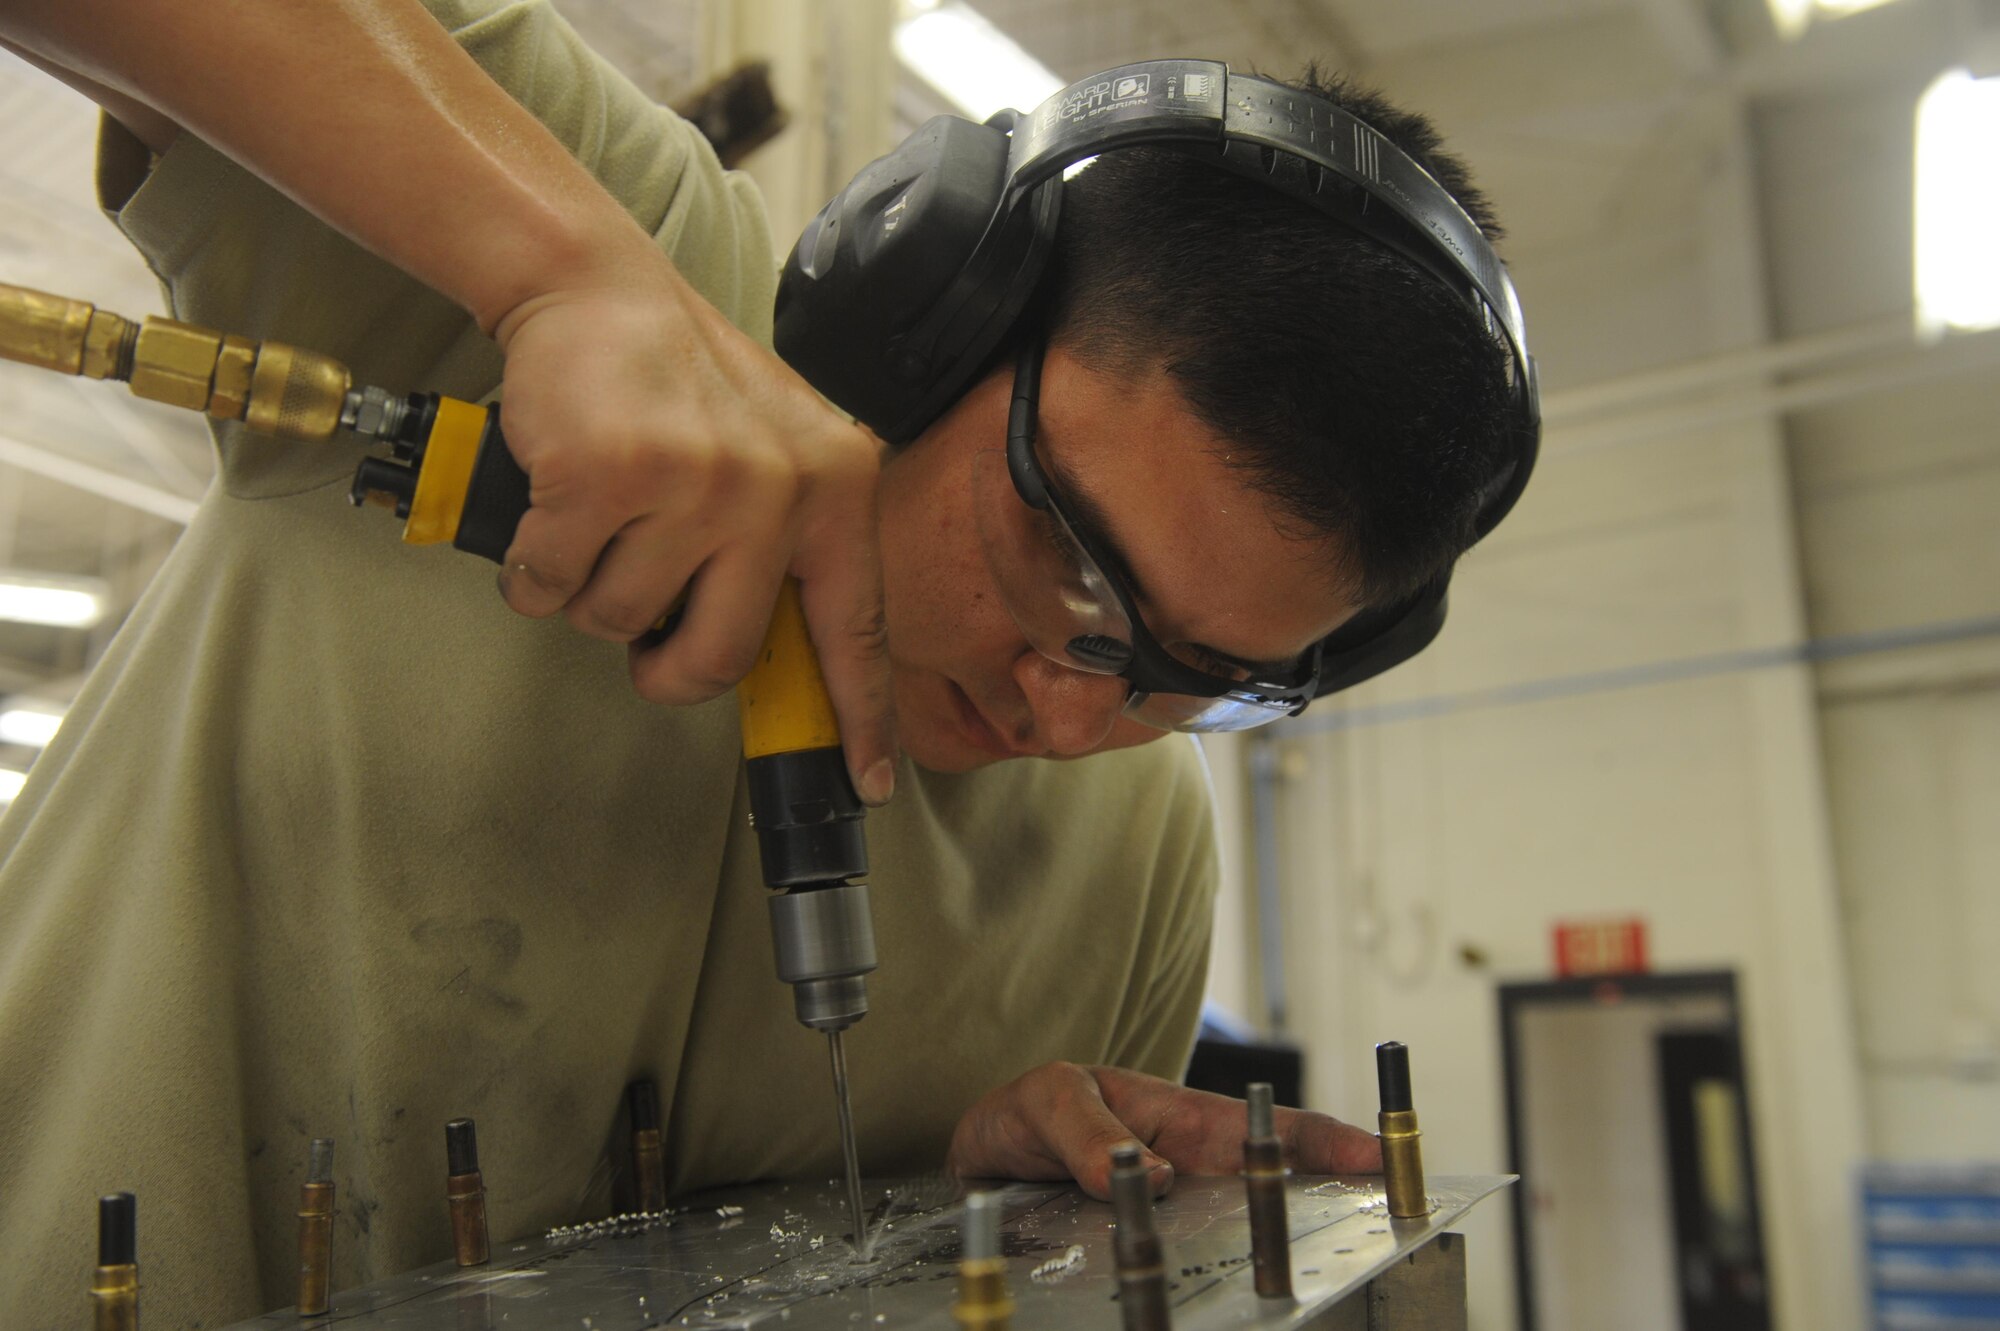 U.S. Air Force Airman 1st Class Miguel Acuna, 7th Equipment Maintenance Squadron aircraft structural maintenance apprentice, drills into a simulated aircraft structure July 1, 2016, at Dyess Air Force Base, Texas. The SAS incorporates various techniques, such as sculpting metal into specific shapes or using specialized drills for Airmen of the sheet metal shop to practice their skills and accomplish on-the-job training. Completing these tasks is necessary to receive their upgrade training certification. (U.S. Air Force photo by Airman 1st Class Rebecca Van Syoc)